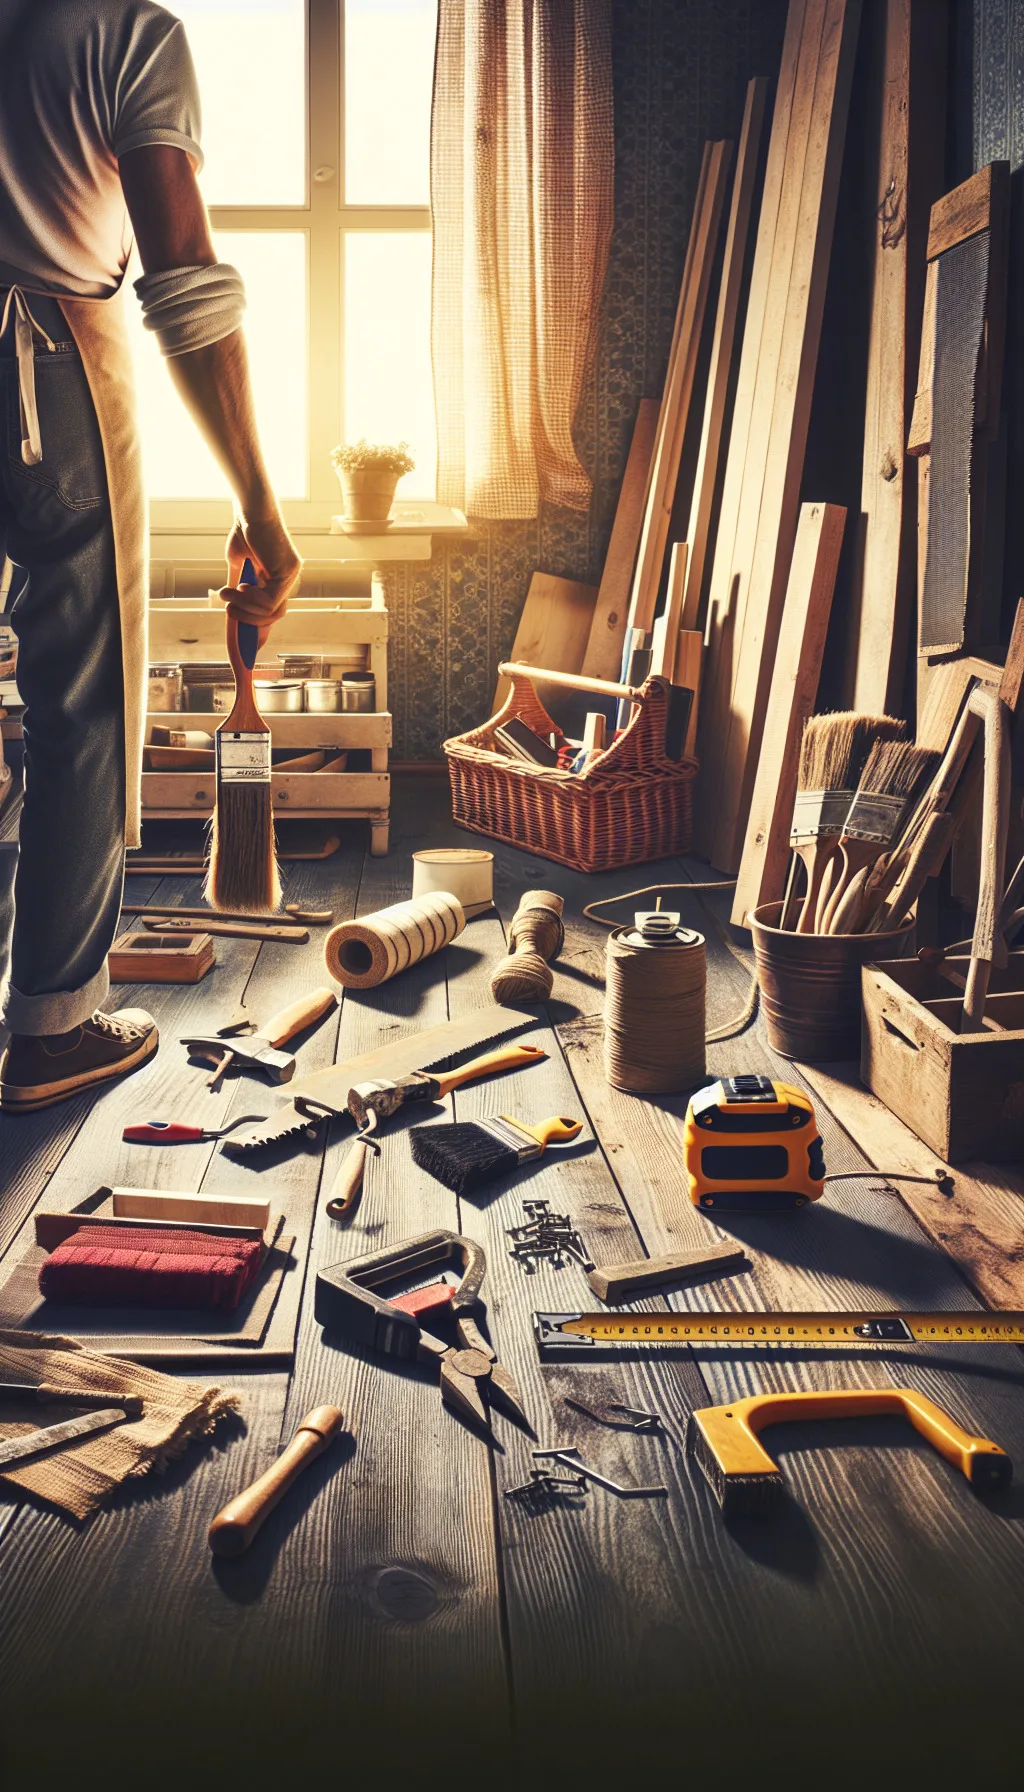 The essential tools and equipment every homeowner needs for their next home improvement project.